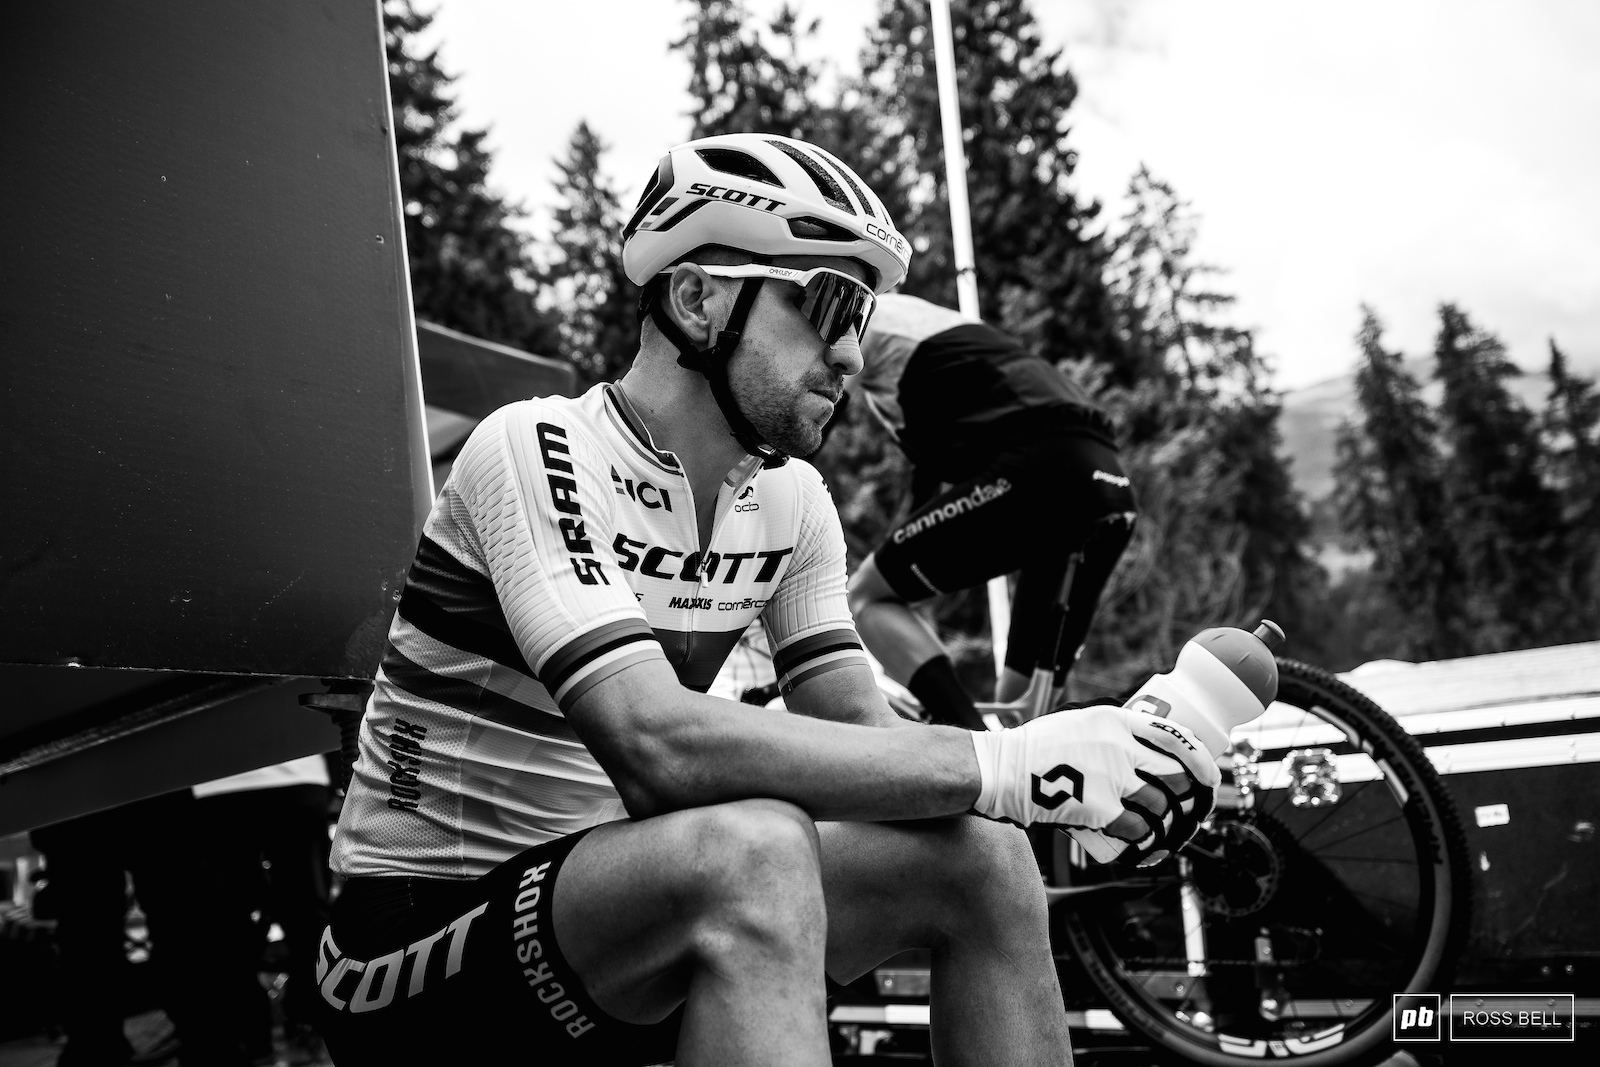 Nino Schurter composes himself ahead of what would turn out to be an eventful afternoon...